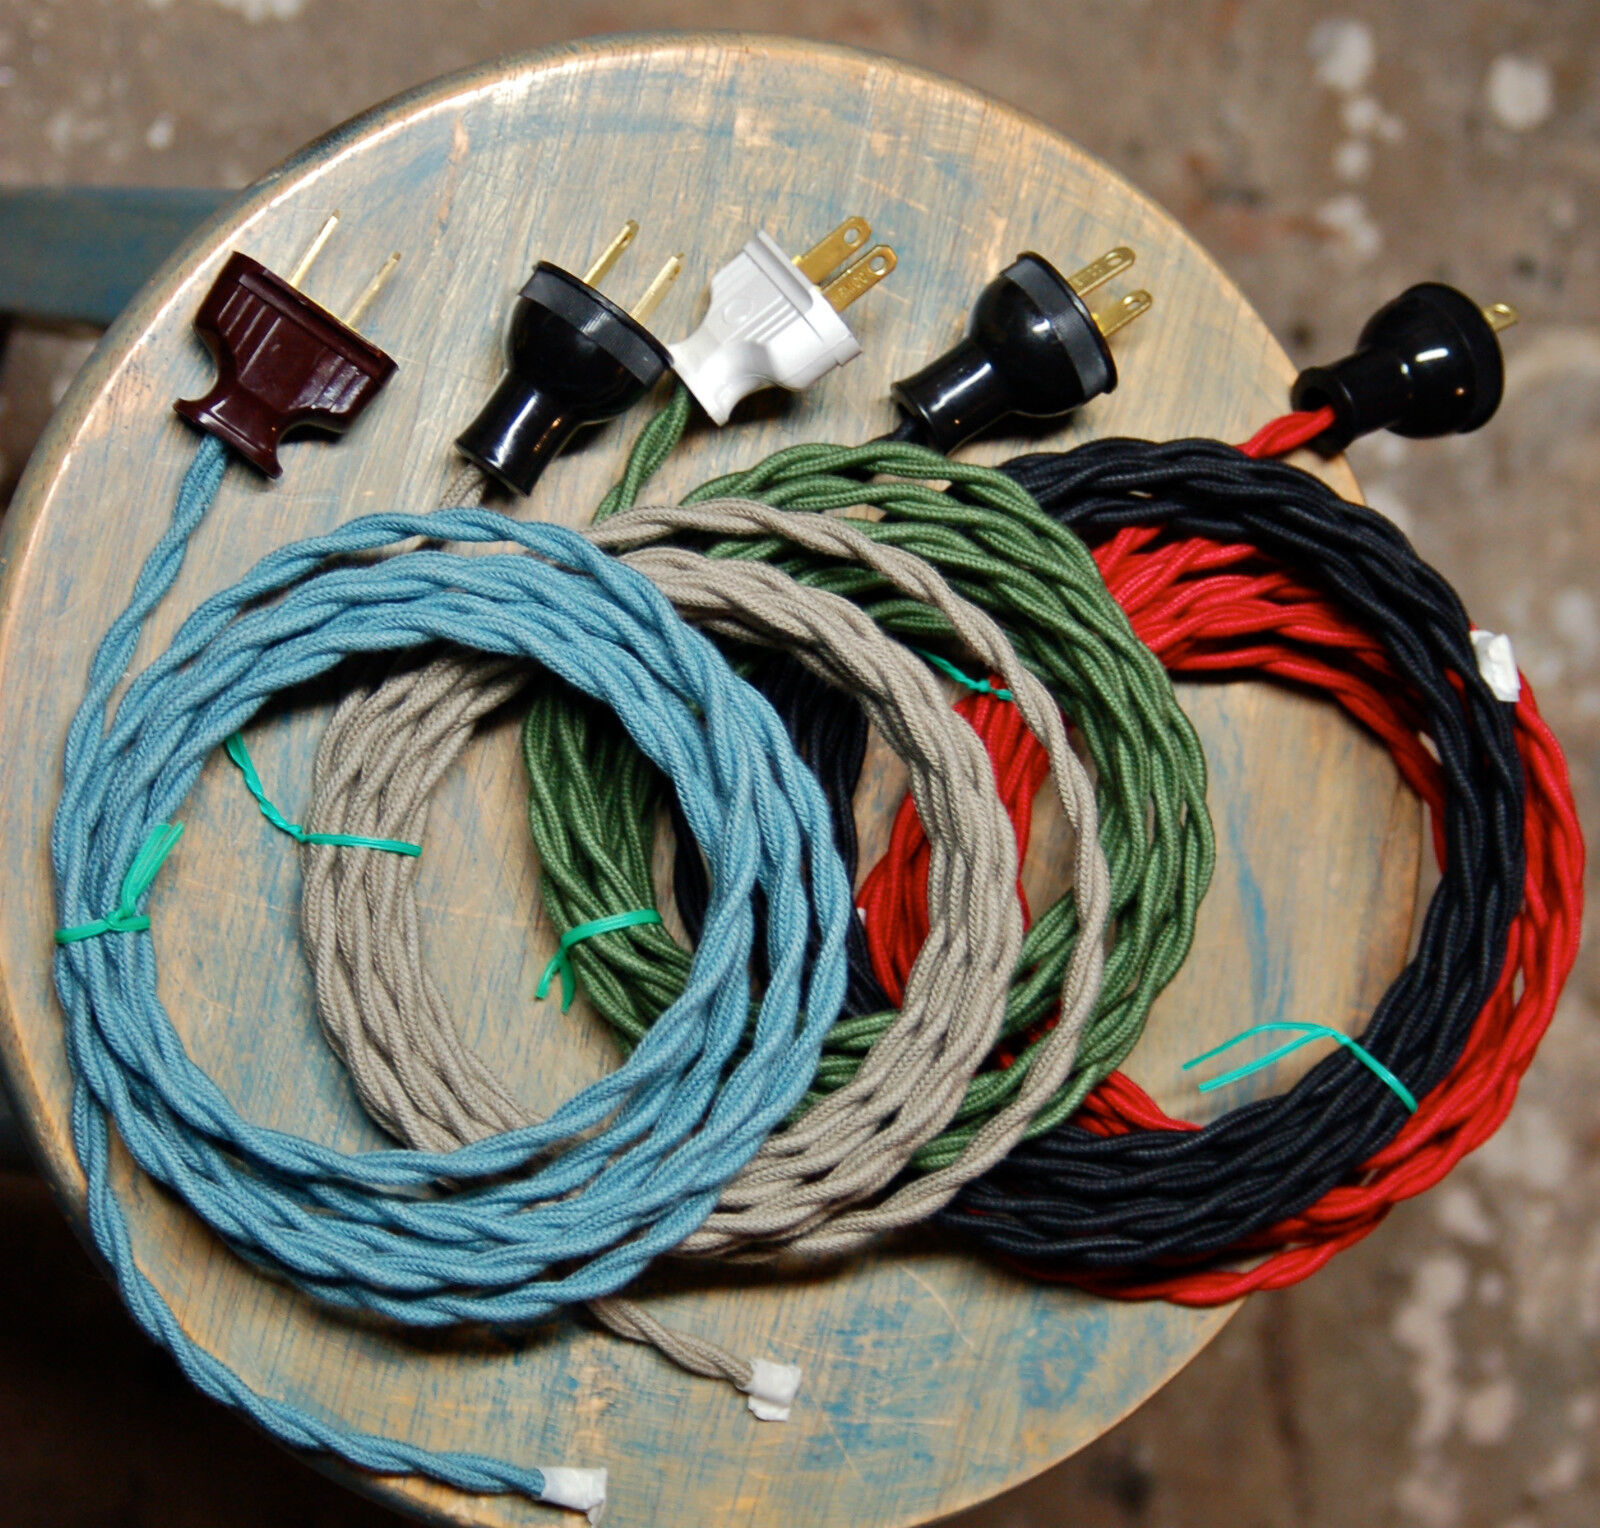 8' Twisted Cloth Covered Wire & Plug, Vintage Light Rewire Kit, Lamp Cord, rayon